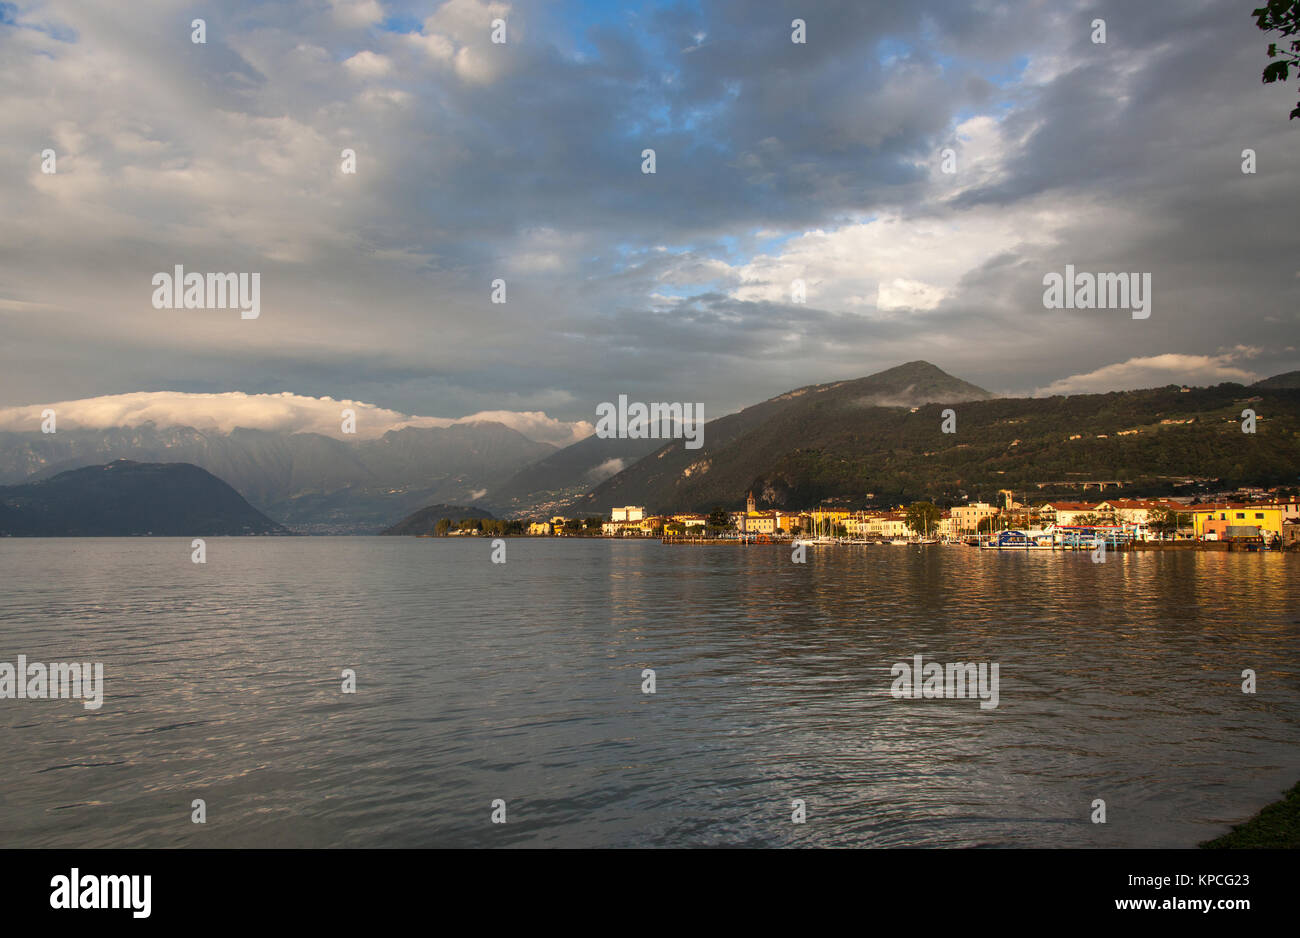 Lake Iseo, Italy. Picturesque dusk view of Lake Iseo, with the town of Iseo on the right of the image and the island of Monte Isola on the left. Stock Photo